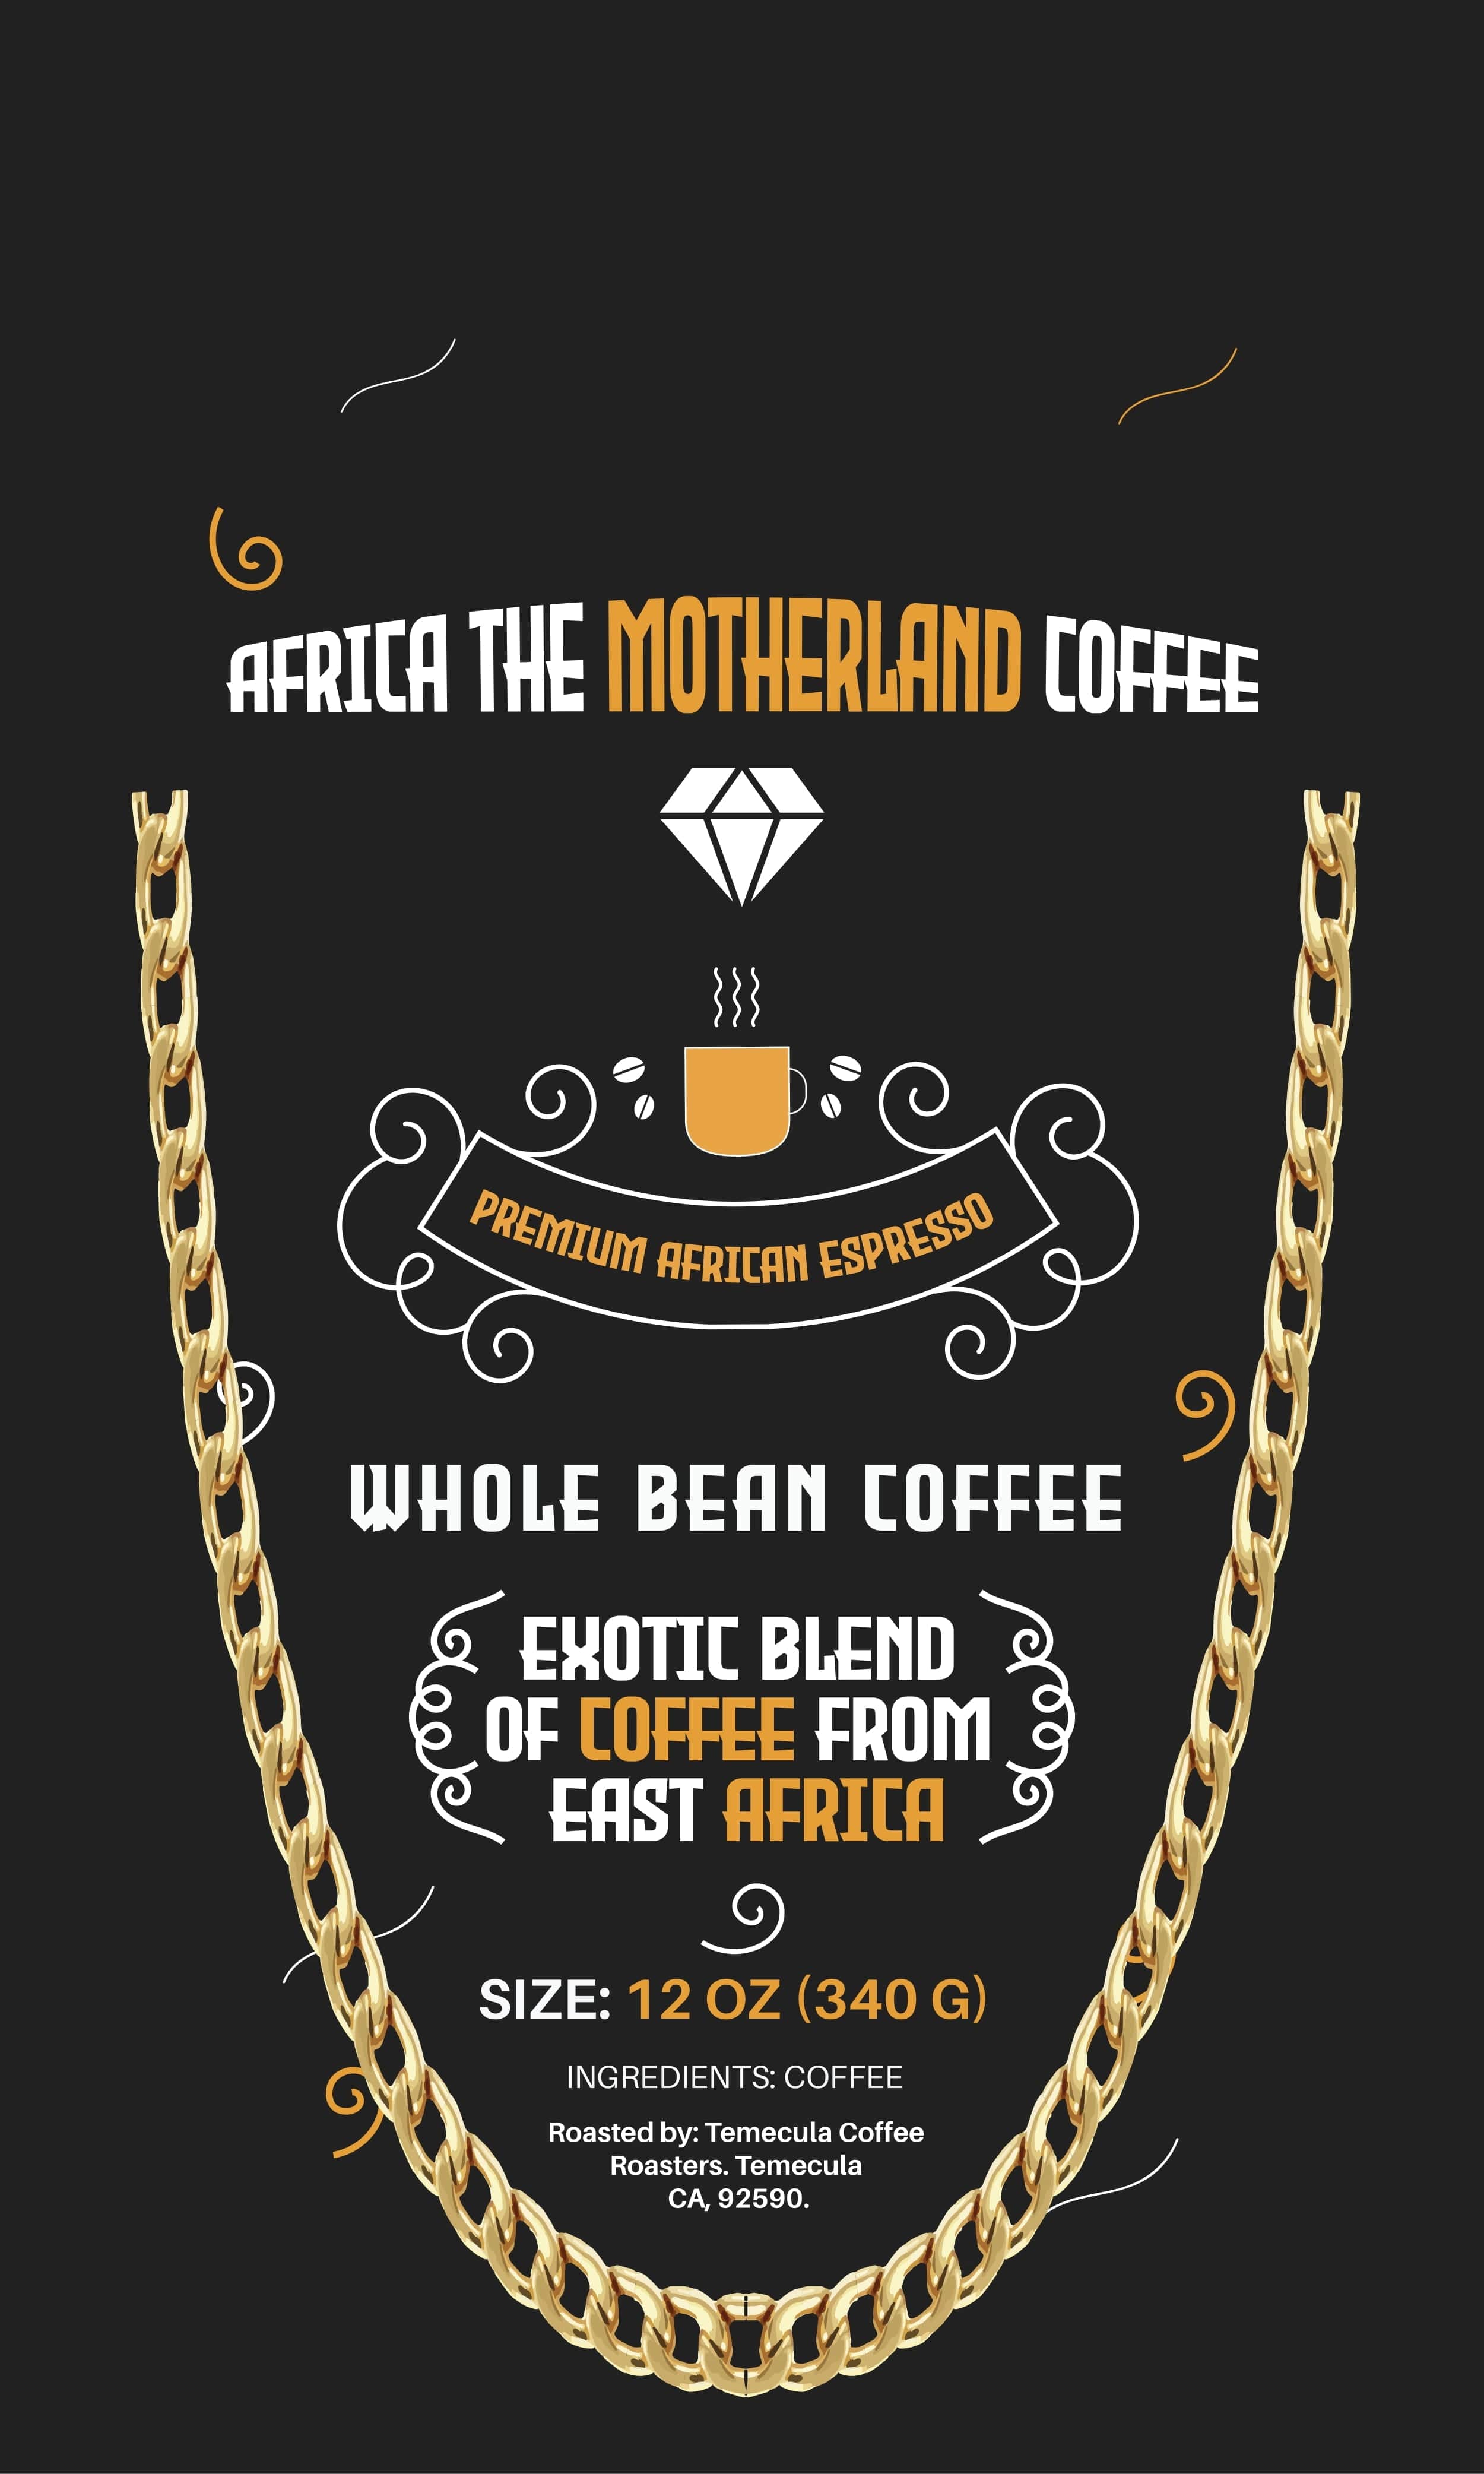 VVS Jewelry hip hop jewelry Africa the Motherland Coffee